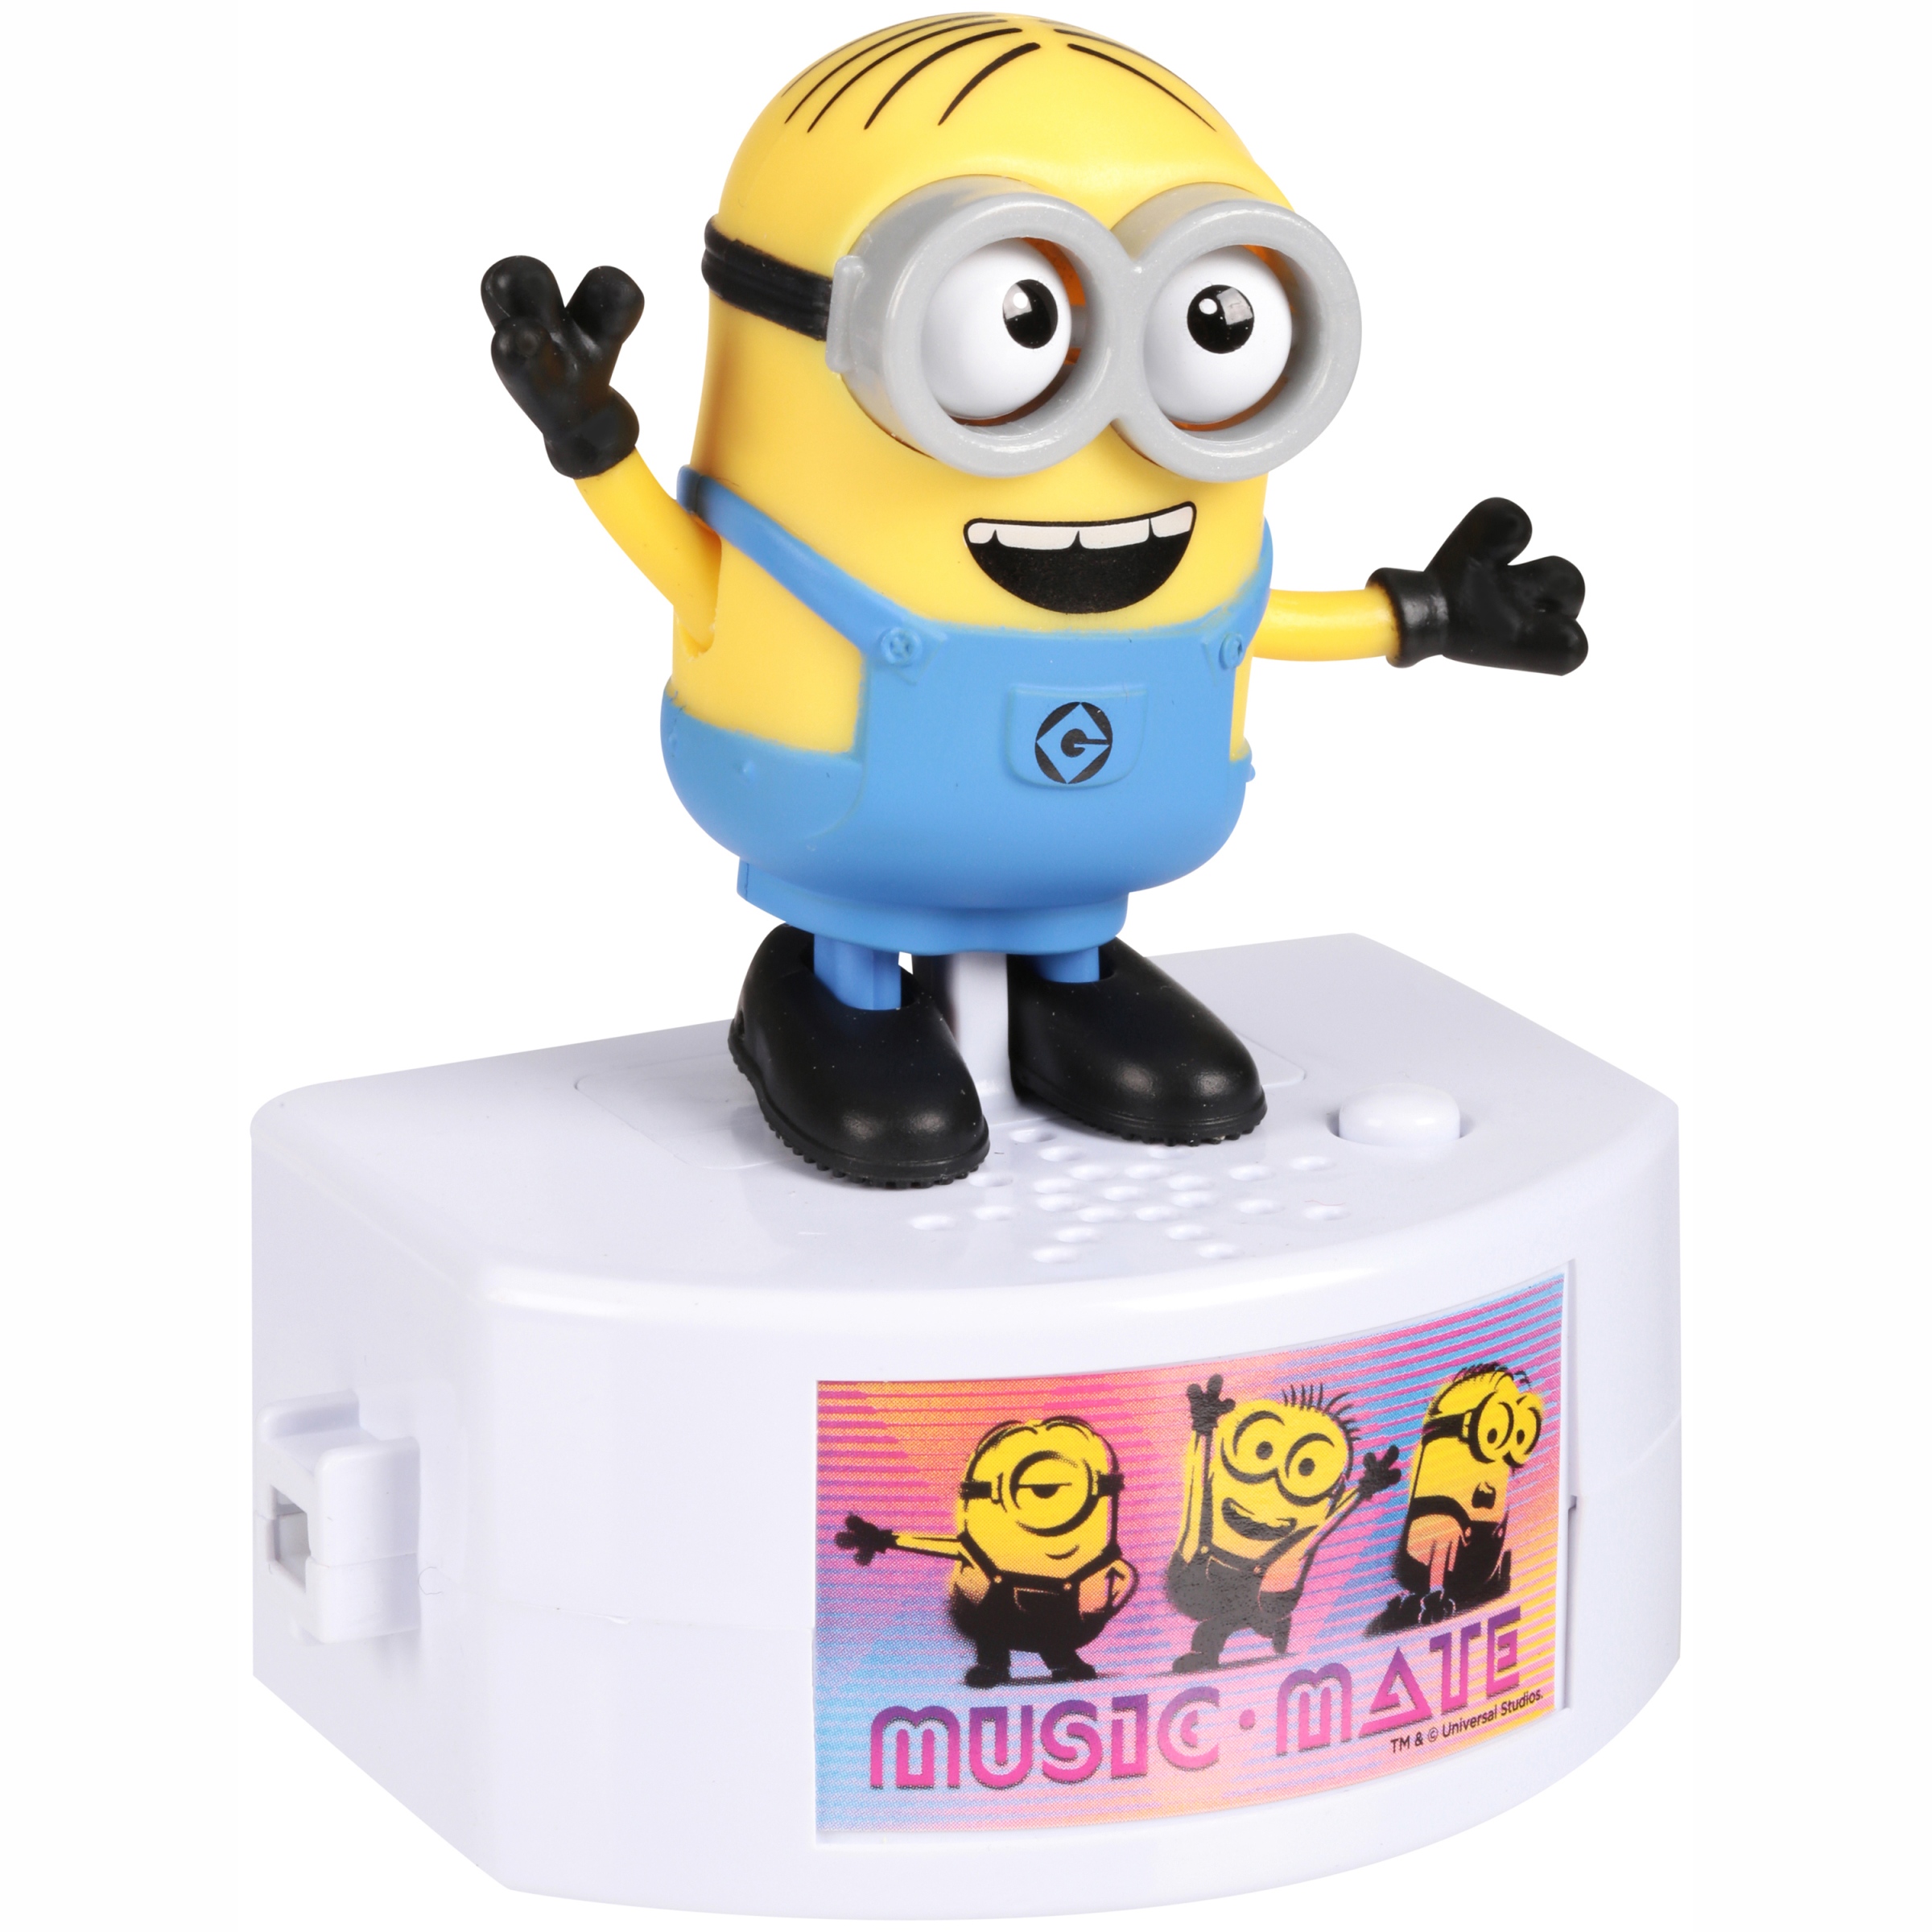 Despicable Me 3 Minion Music-Mate Dave with Voice and Music - image 1 of 5